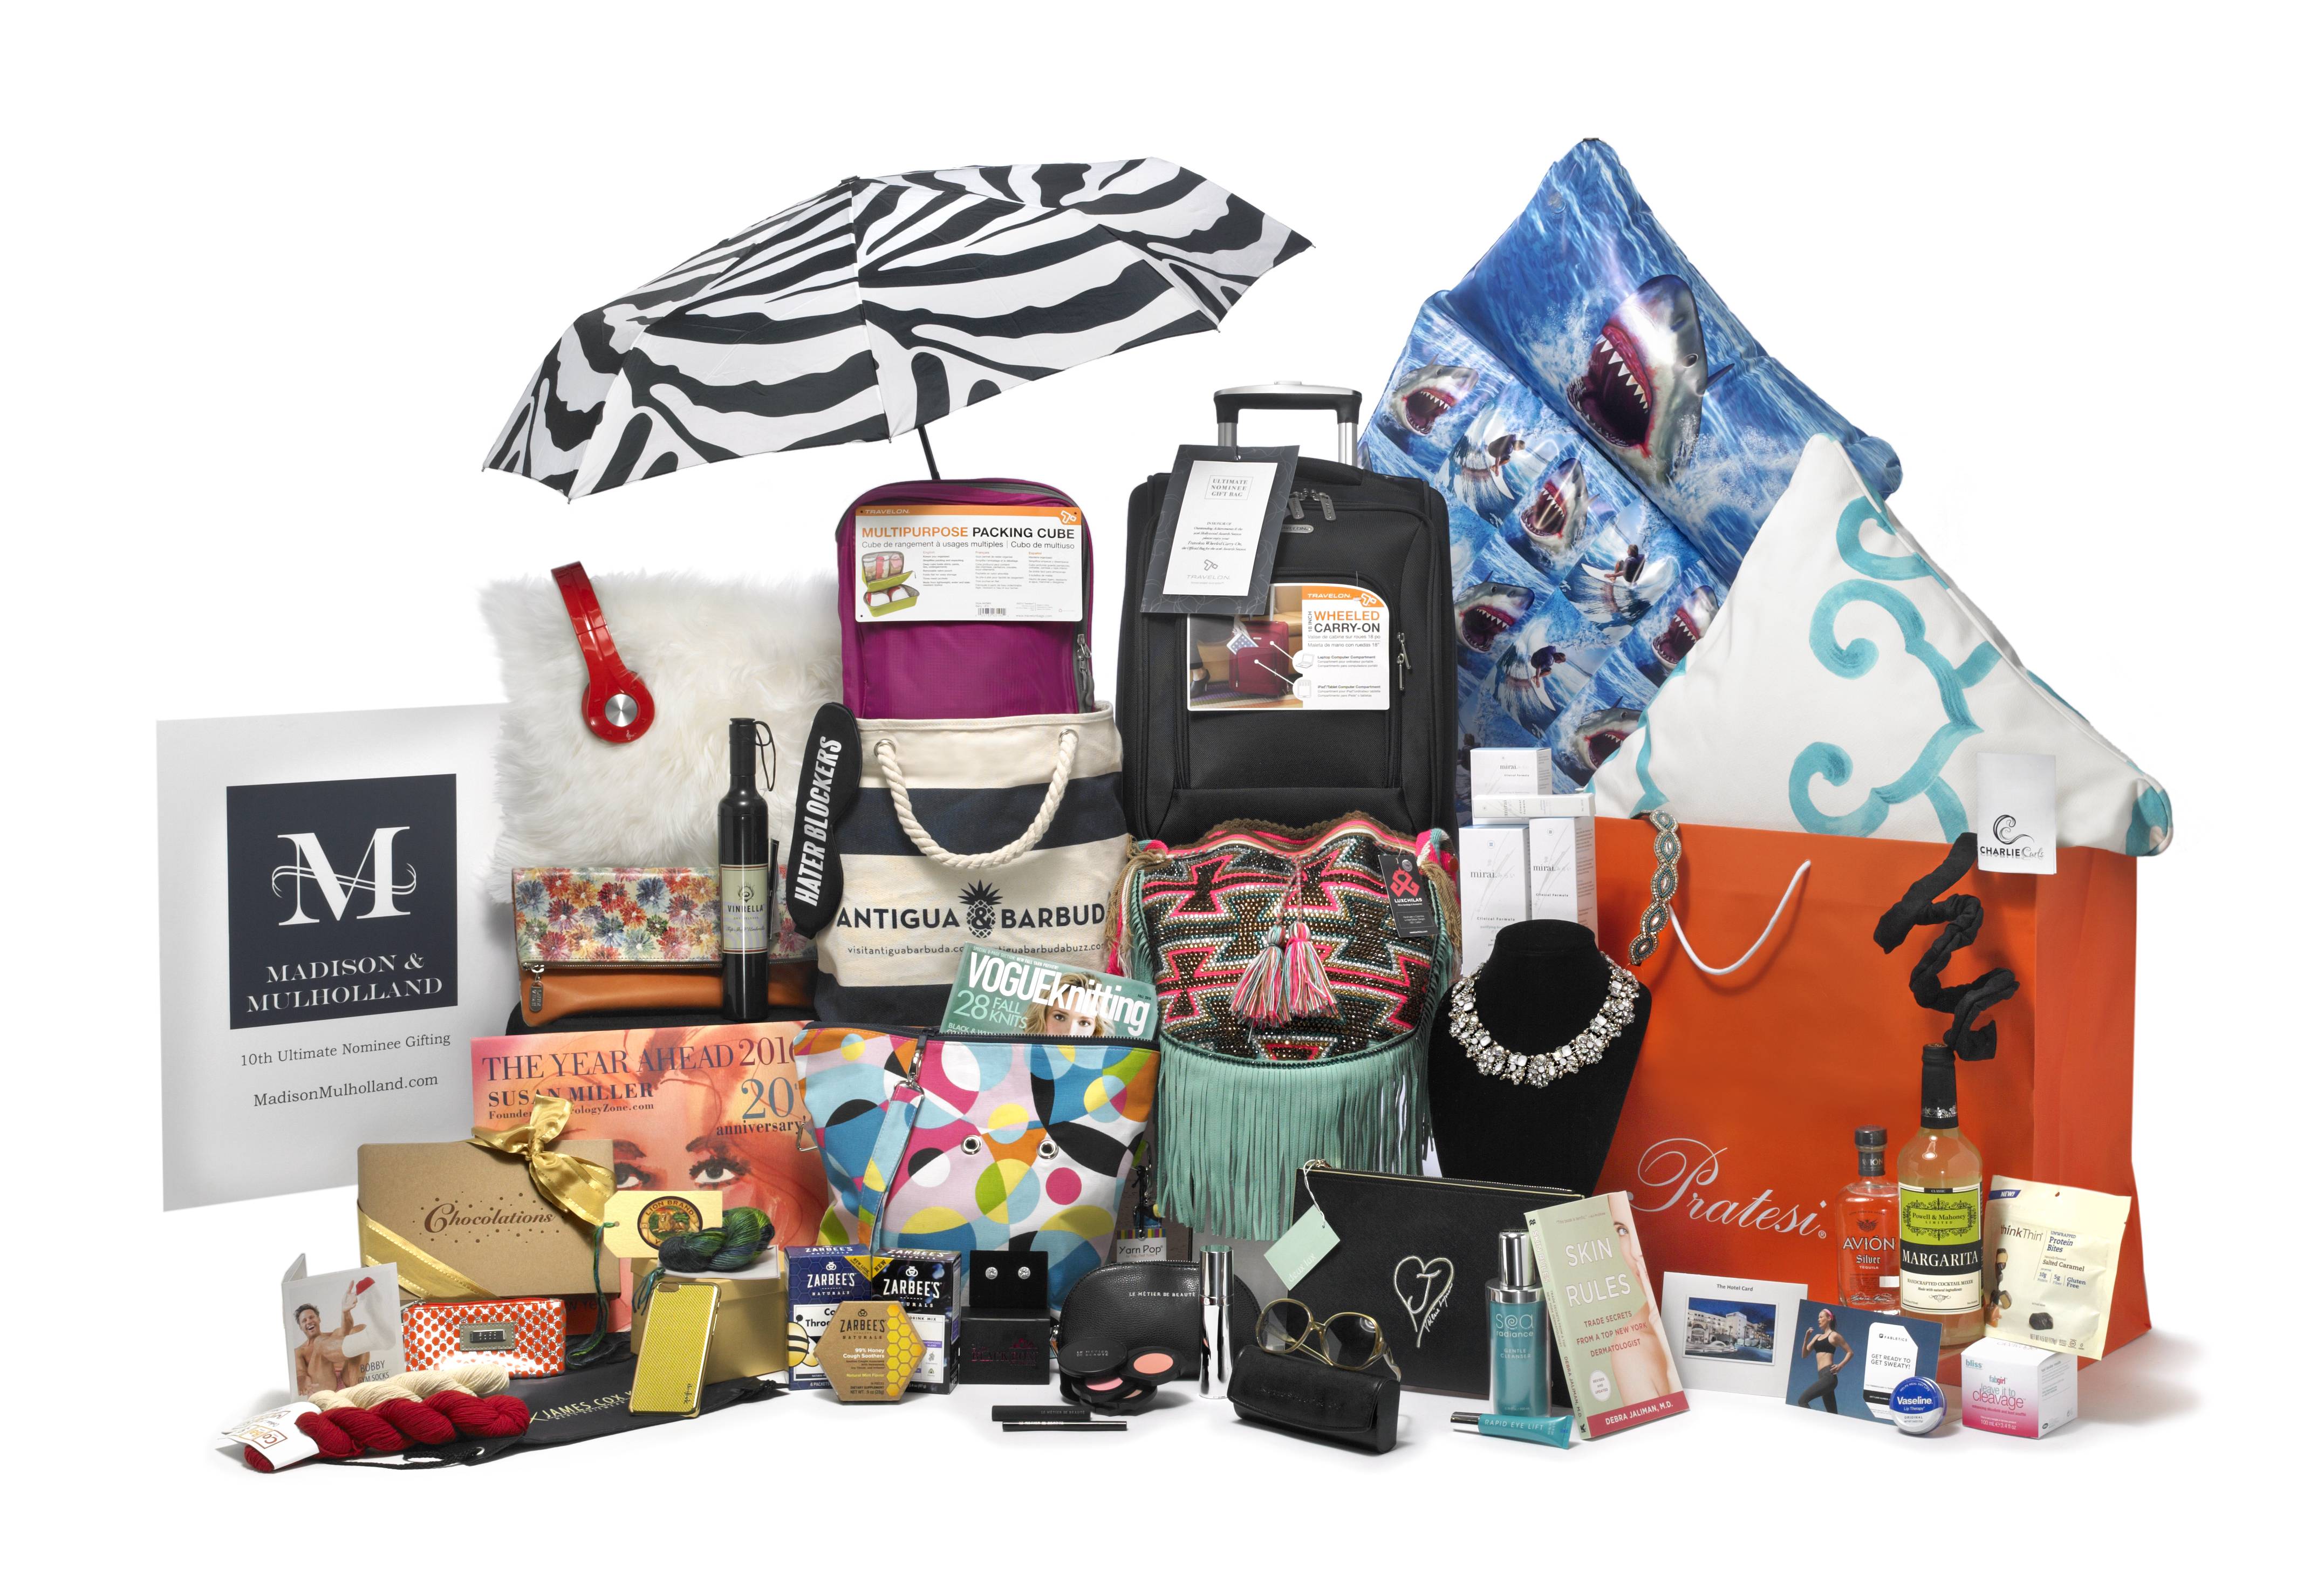 To Be a Nominee! Oscar Gift Bags Total 250K